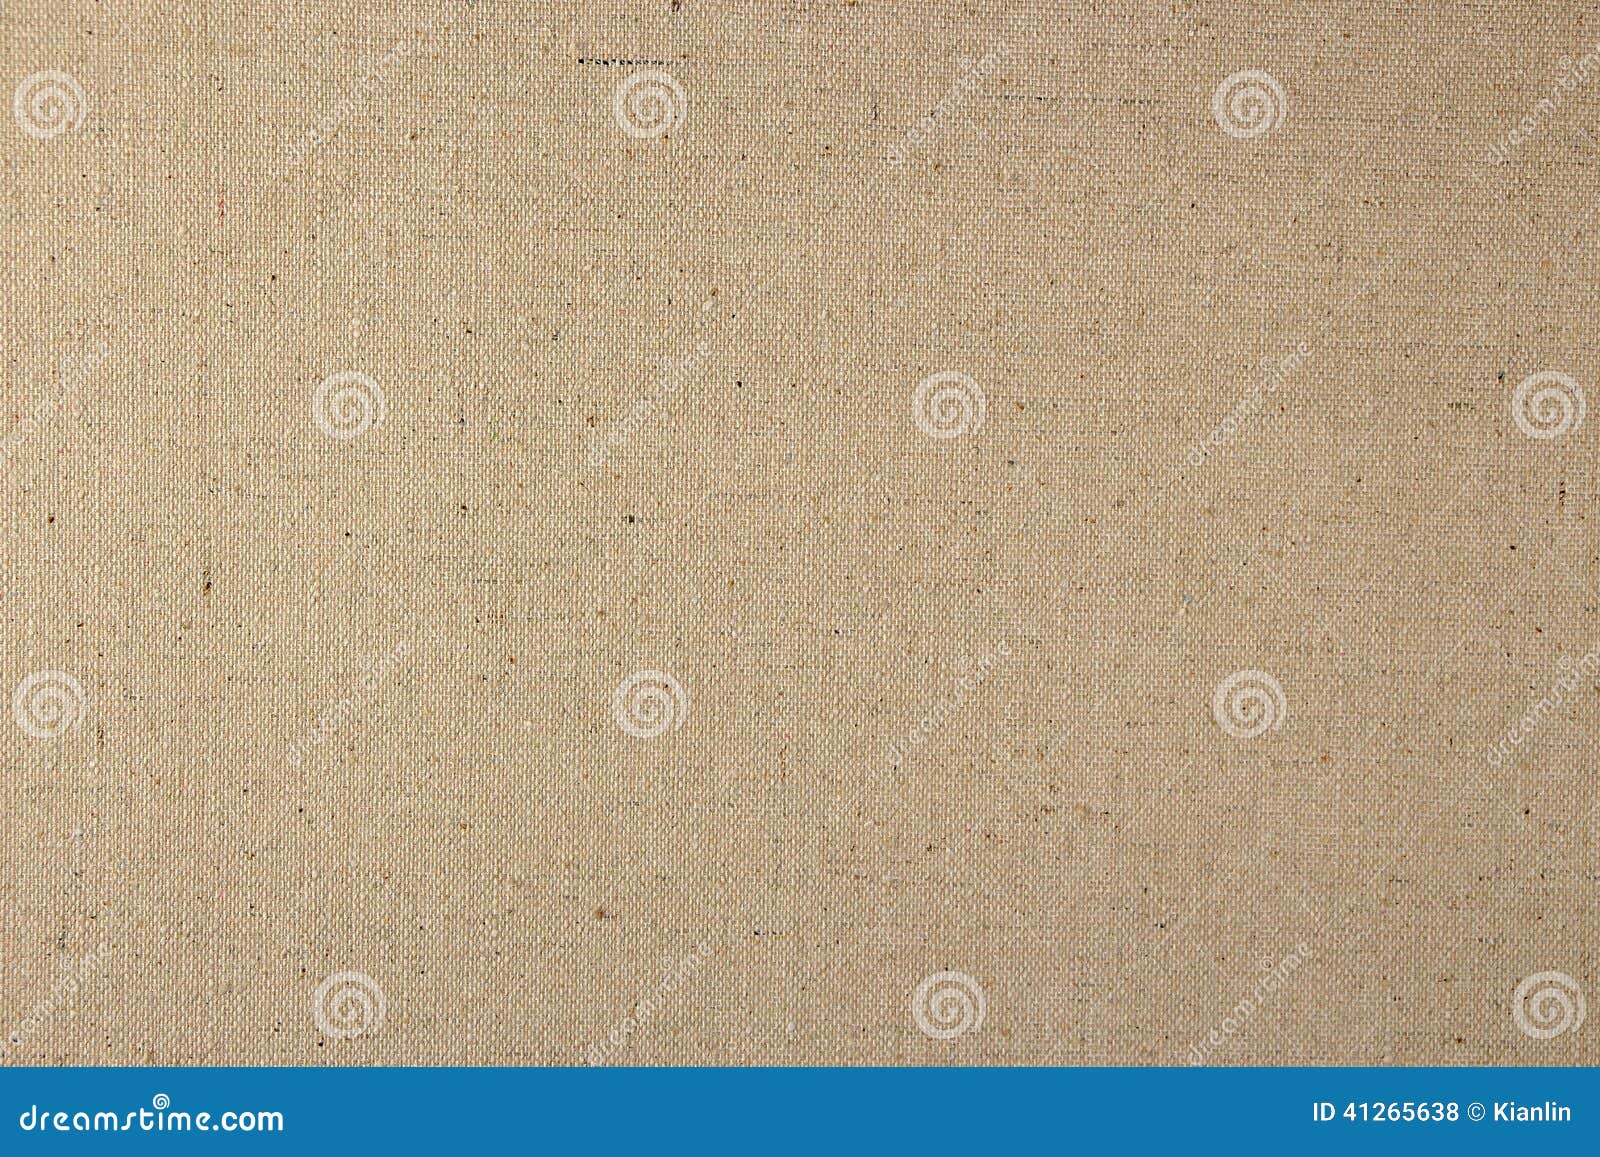 natural linen fabric background